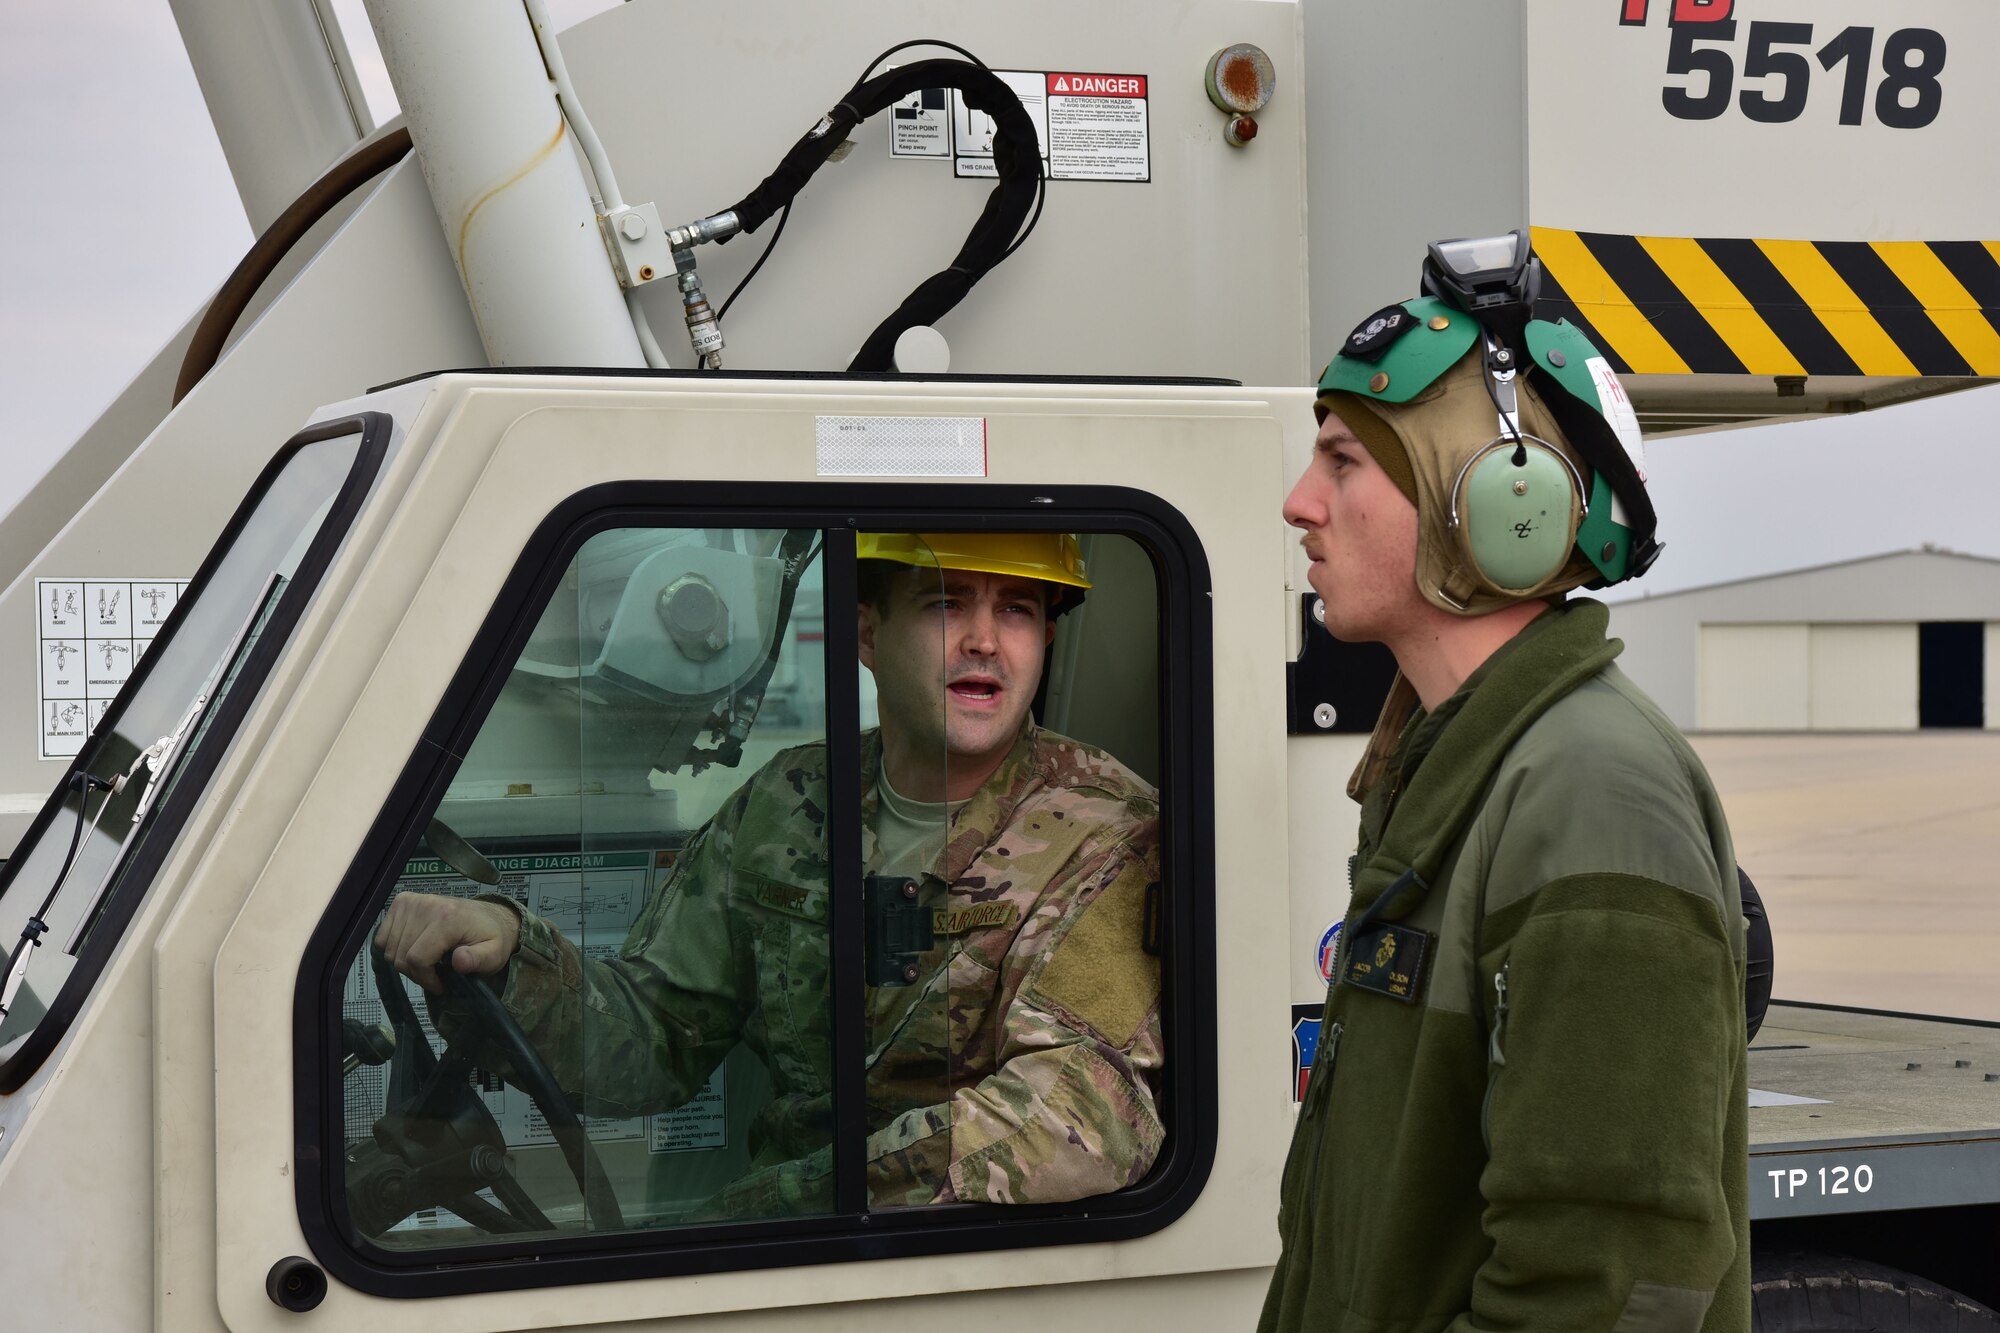 A man in the operational camouflage uniform in a crane speaks to a man in a flight suit and a headset.